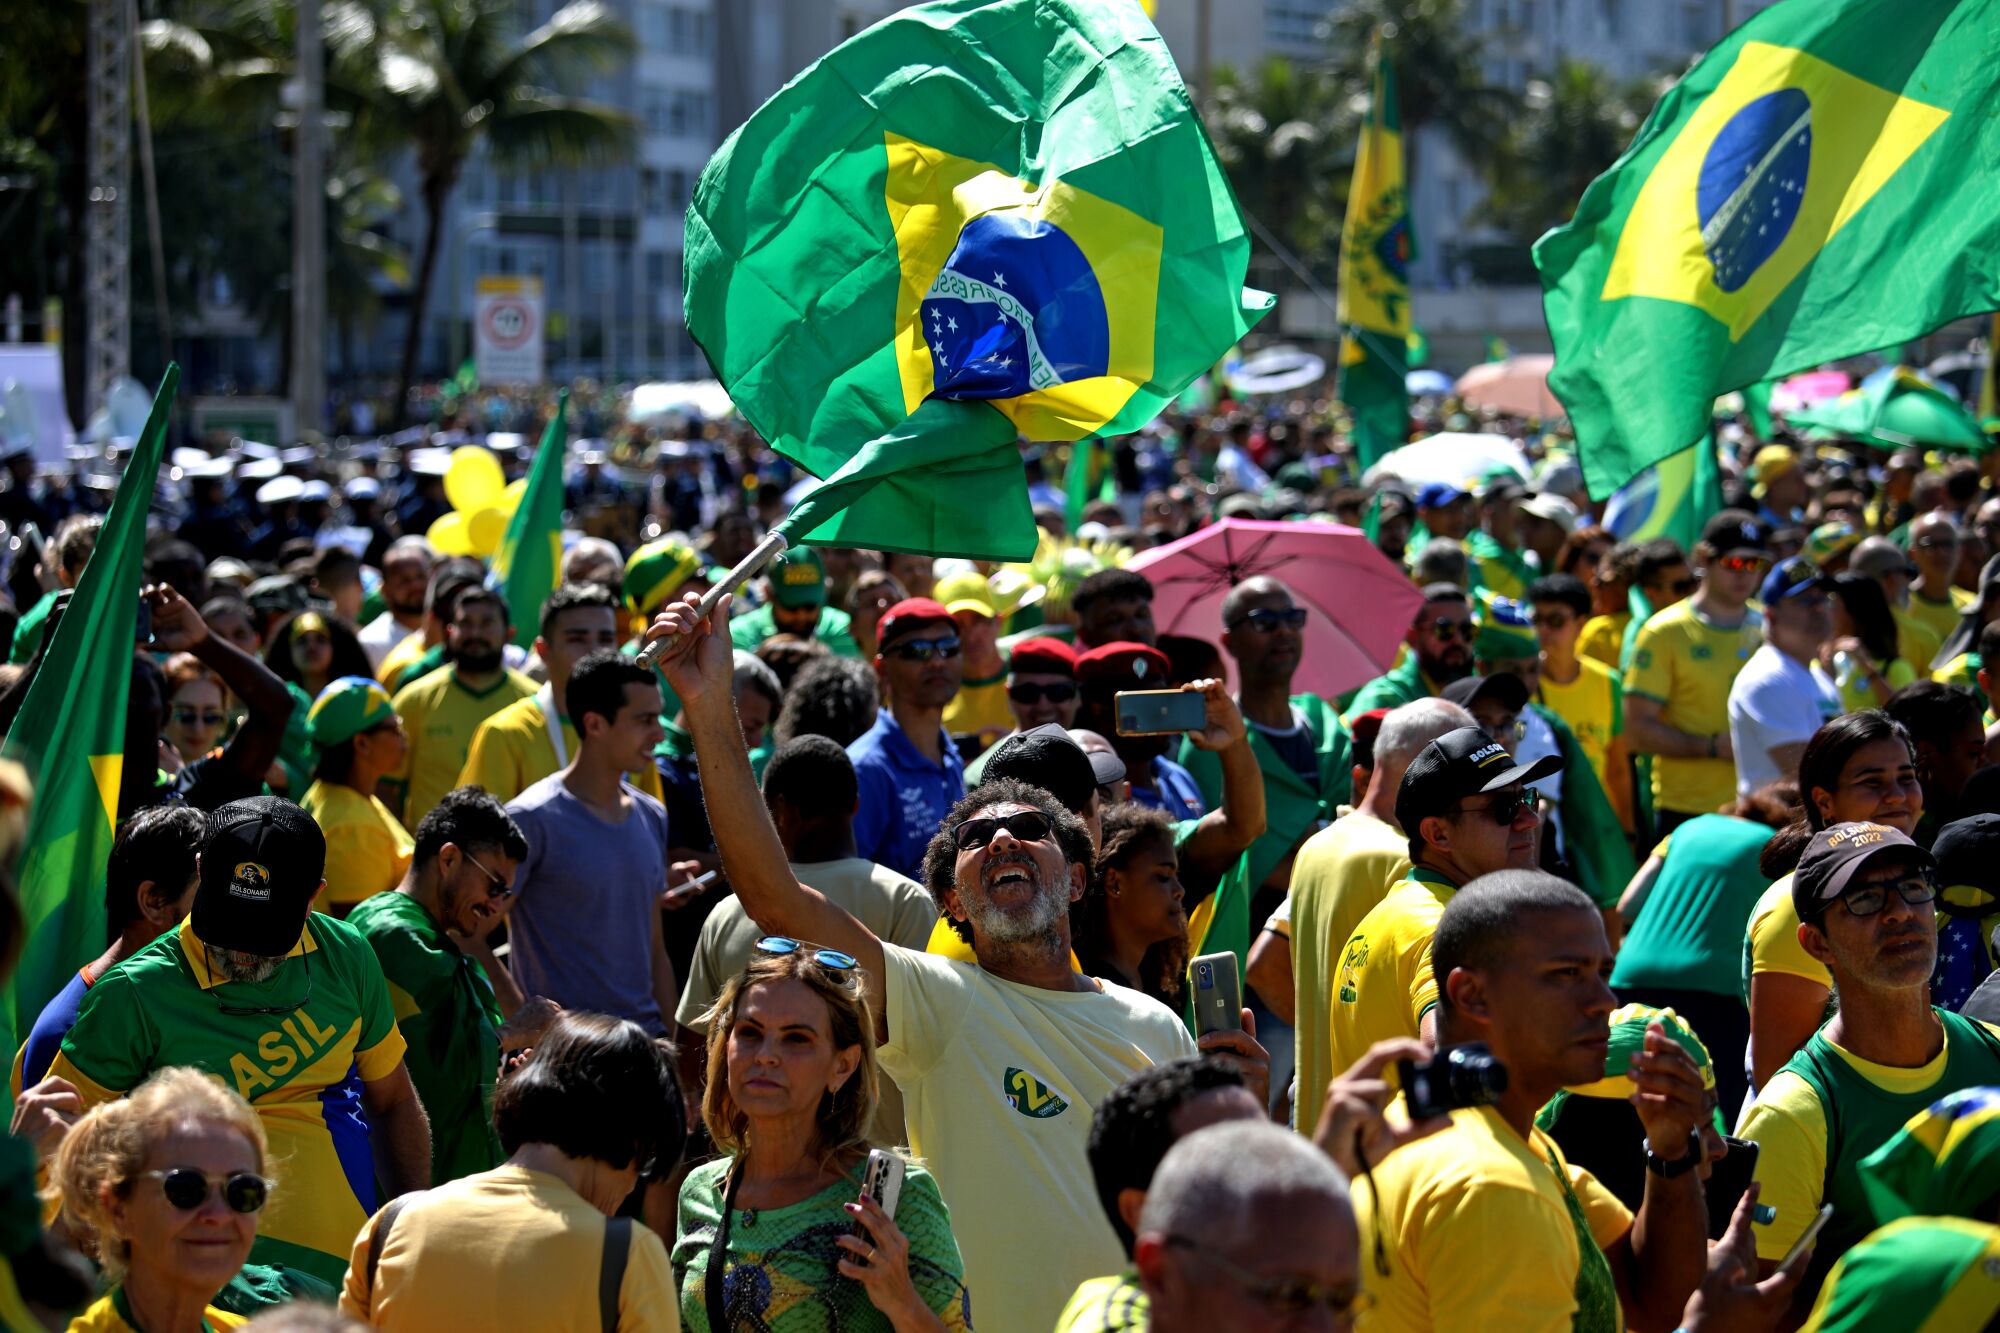 A crowd of people wearing yellow and green, with some waving green-and-yellow flags 